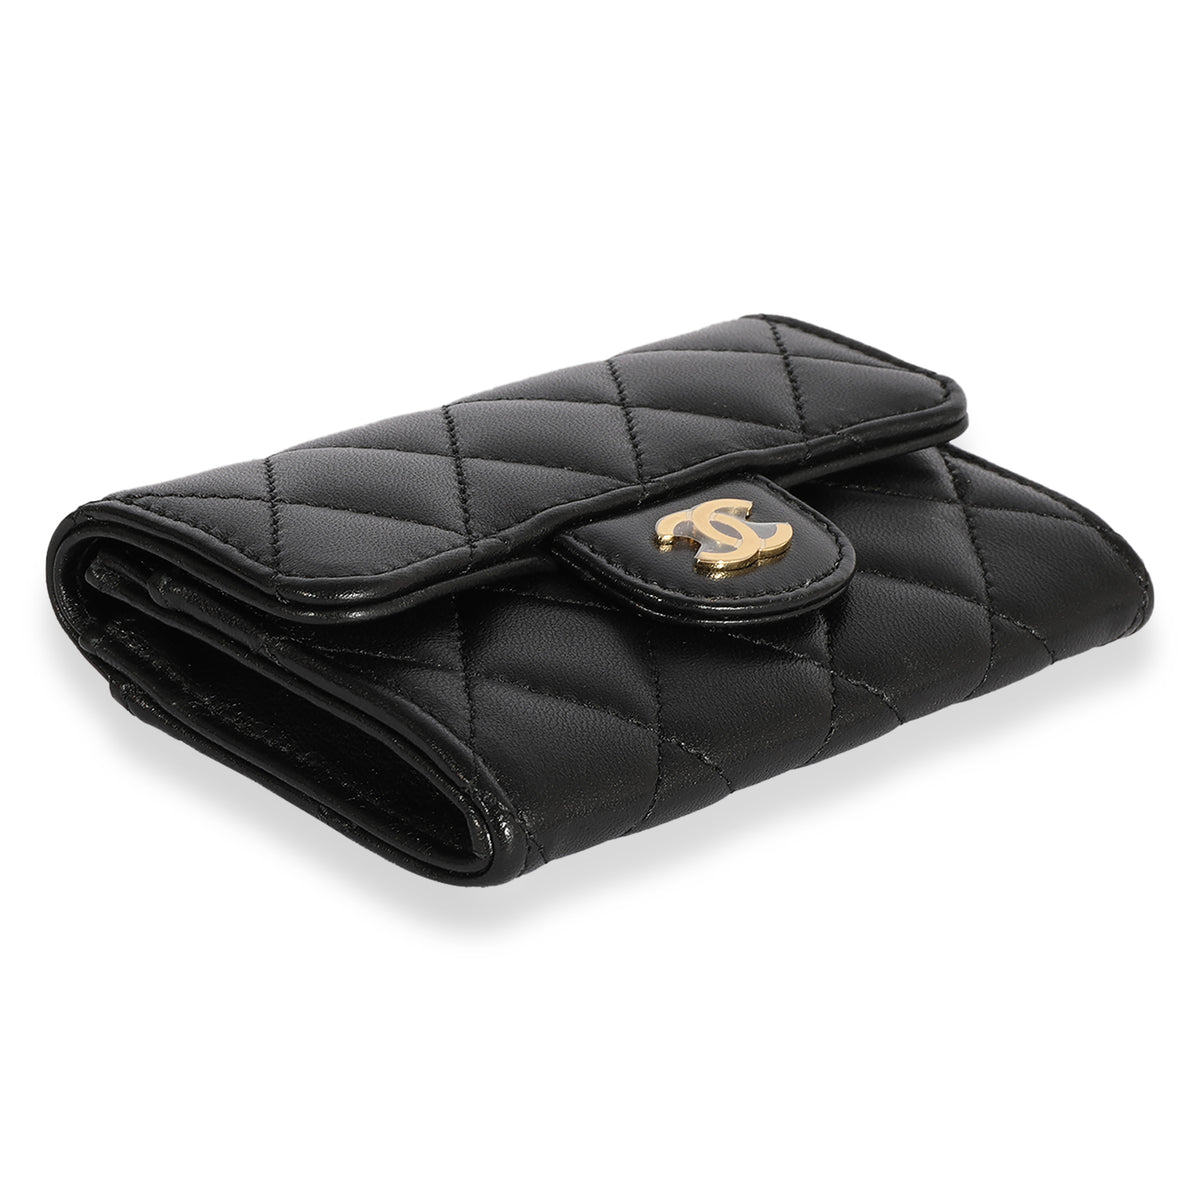 Chanel Black Quilted Lambskin Flap Card Holder Wallet, myGemma